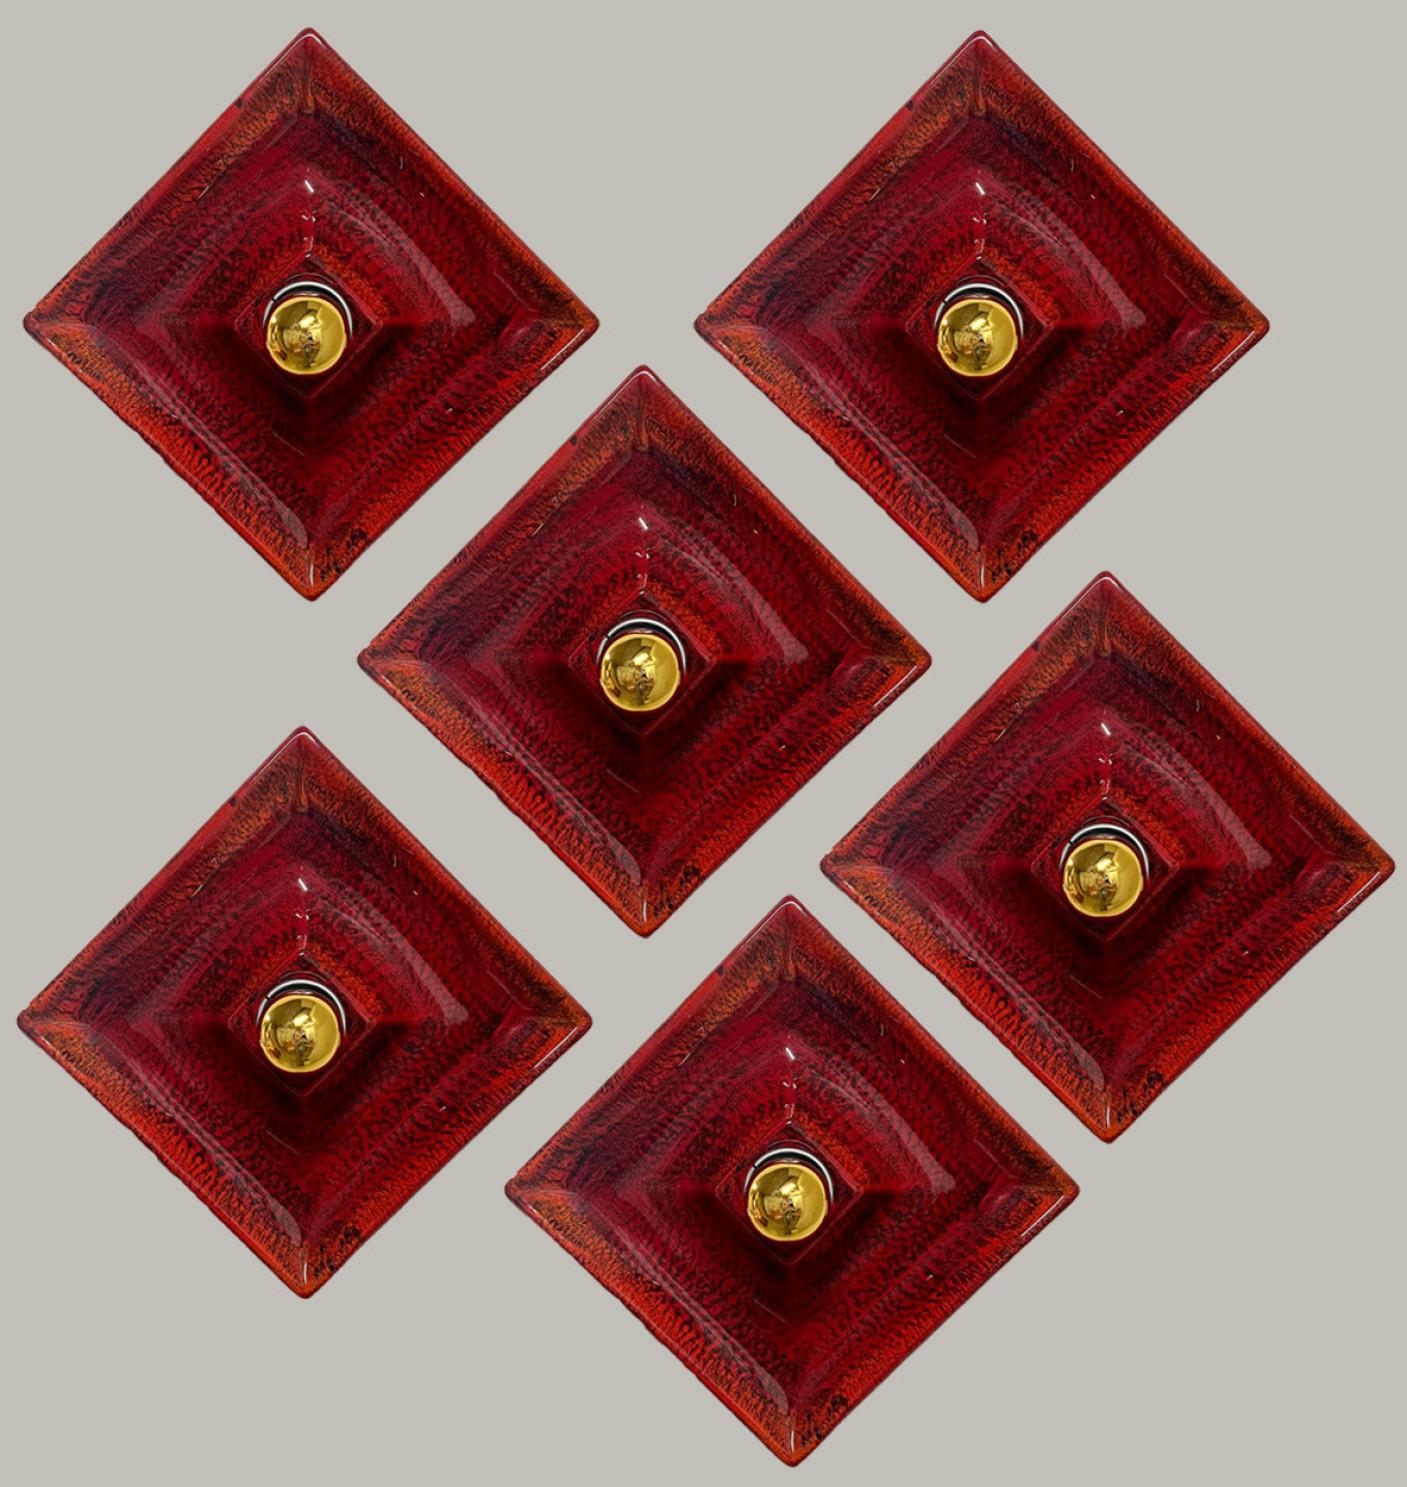 Red ceramic wall lights. Manufactured by Hustadt Leuchten Keramik, Germany in the 1970s.

The glaze is red in a square shape.

We used gold mirror light bulbs (see images), but silver mirror or soft gold light bulbs are also very